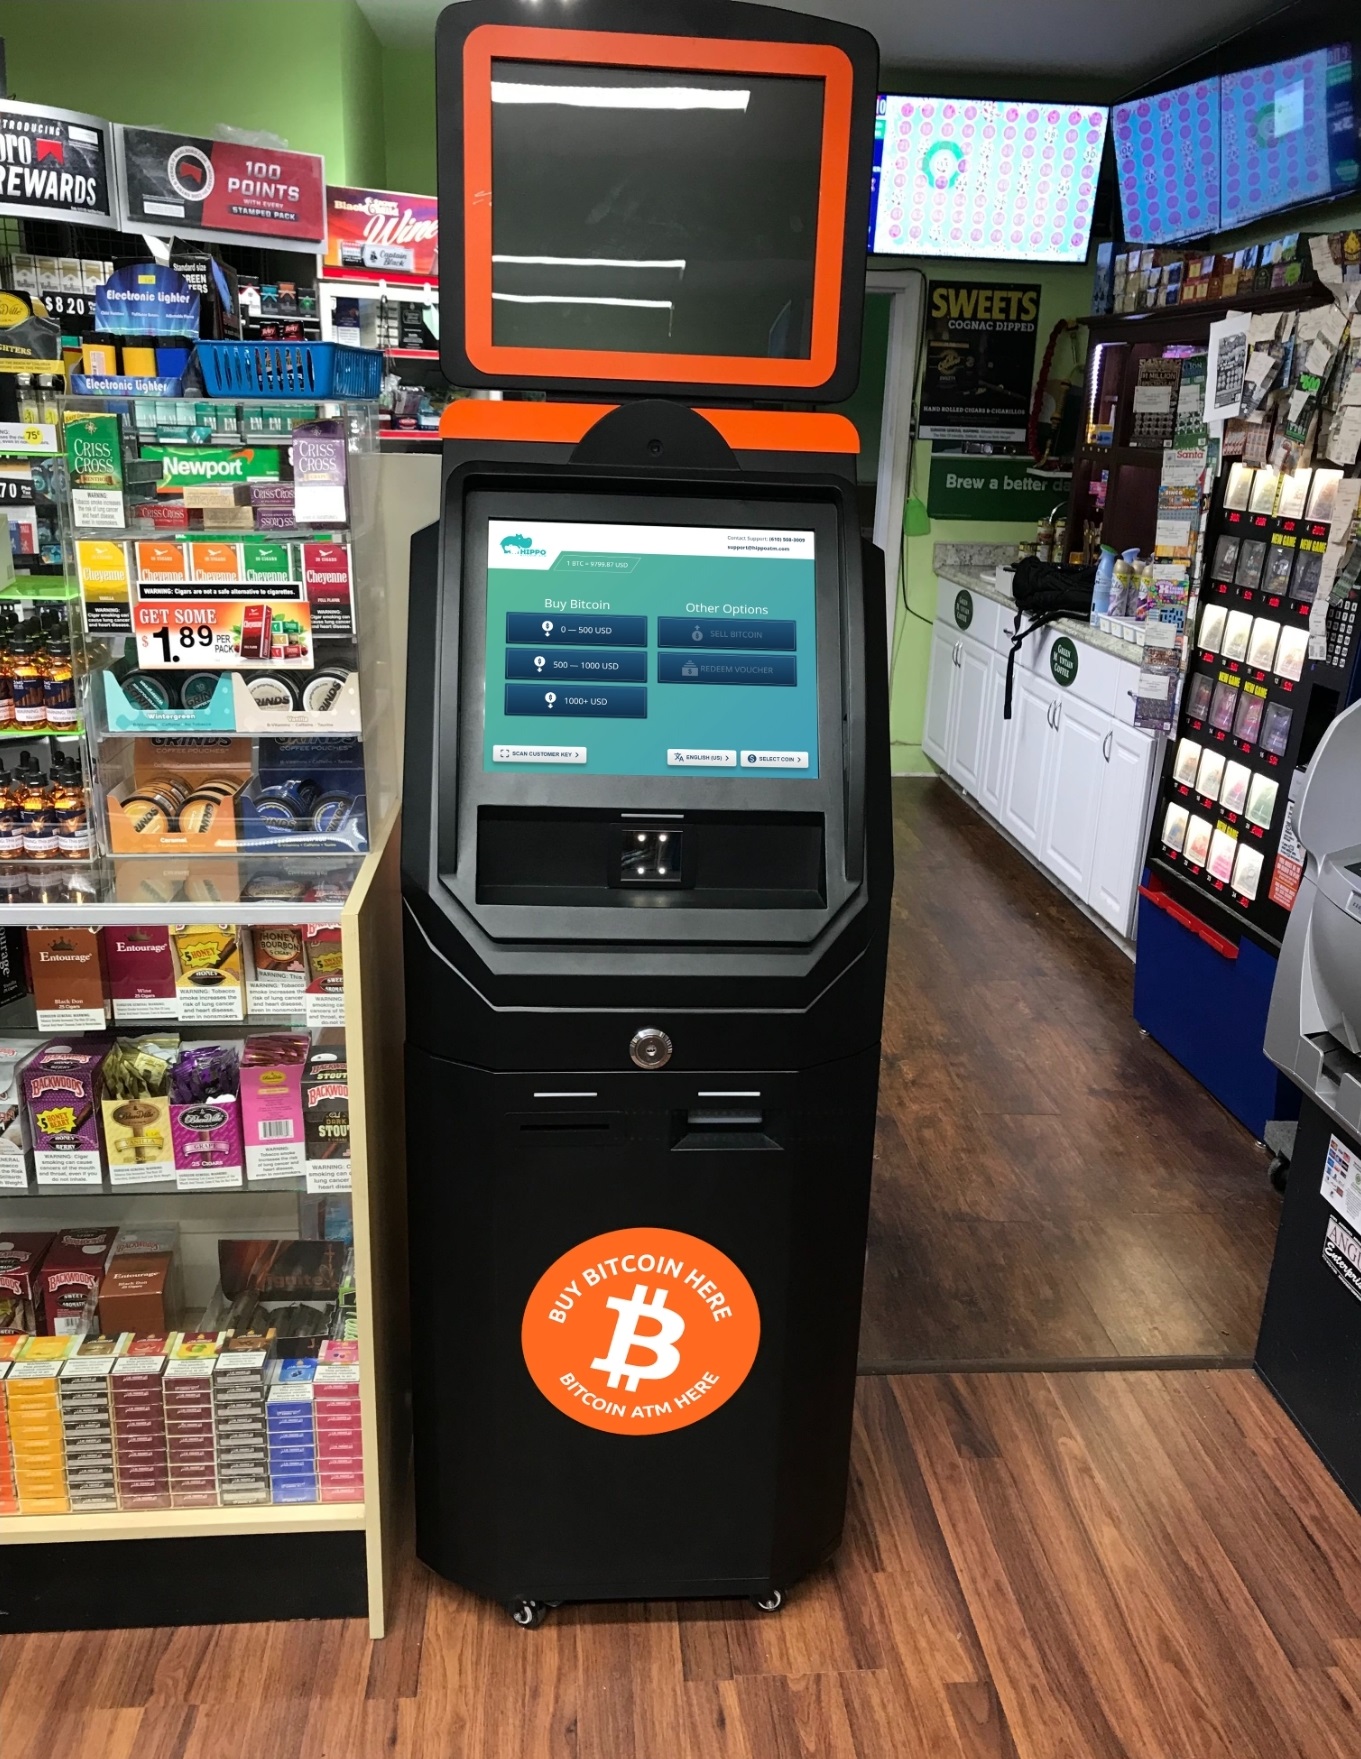 Bitcoin ATM at Elizabethtown buy or sell bitcoin for cash Hippo ATM manufactured by ChainBytes